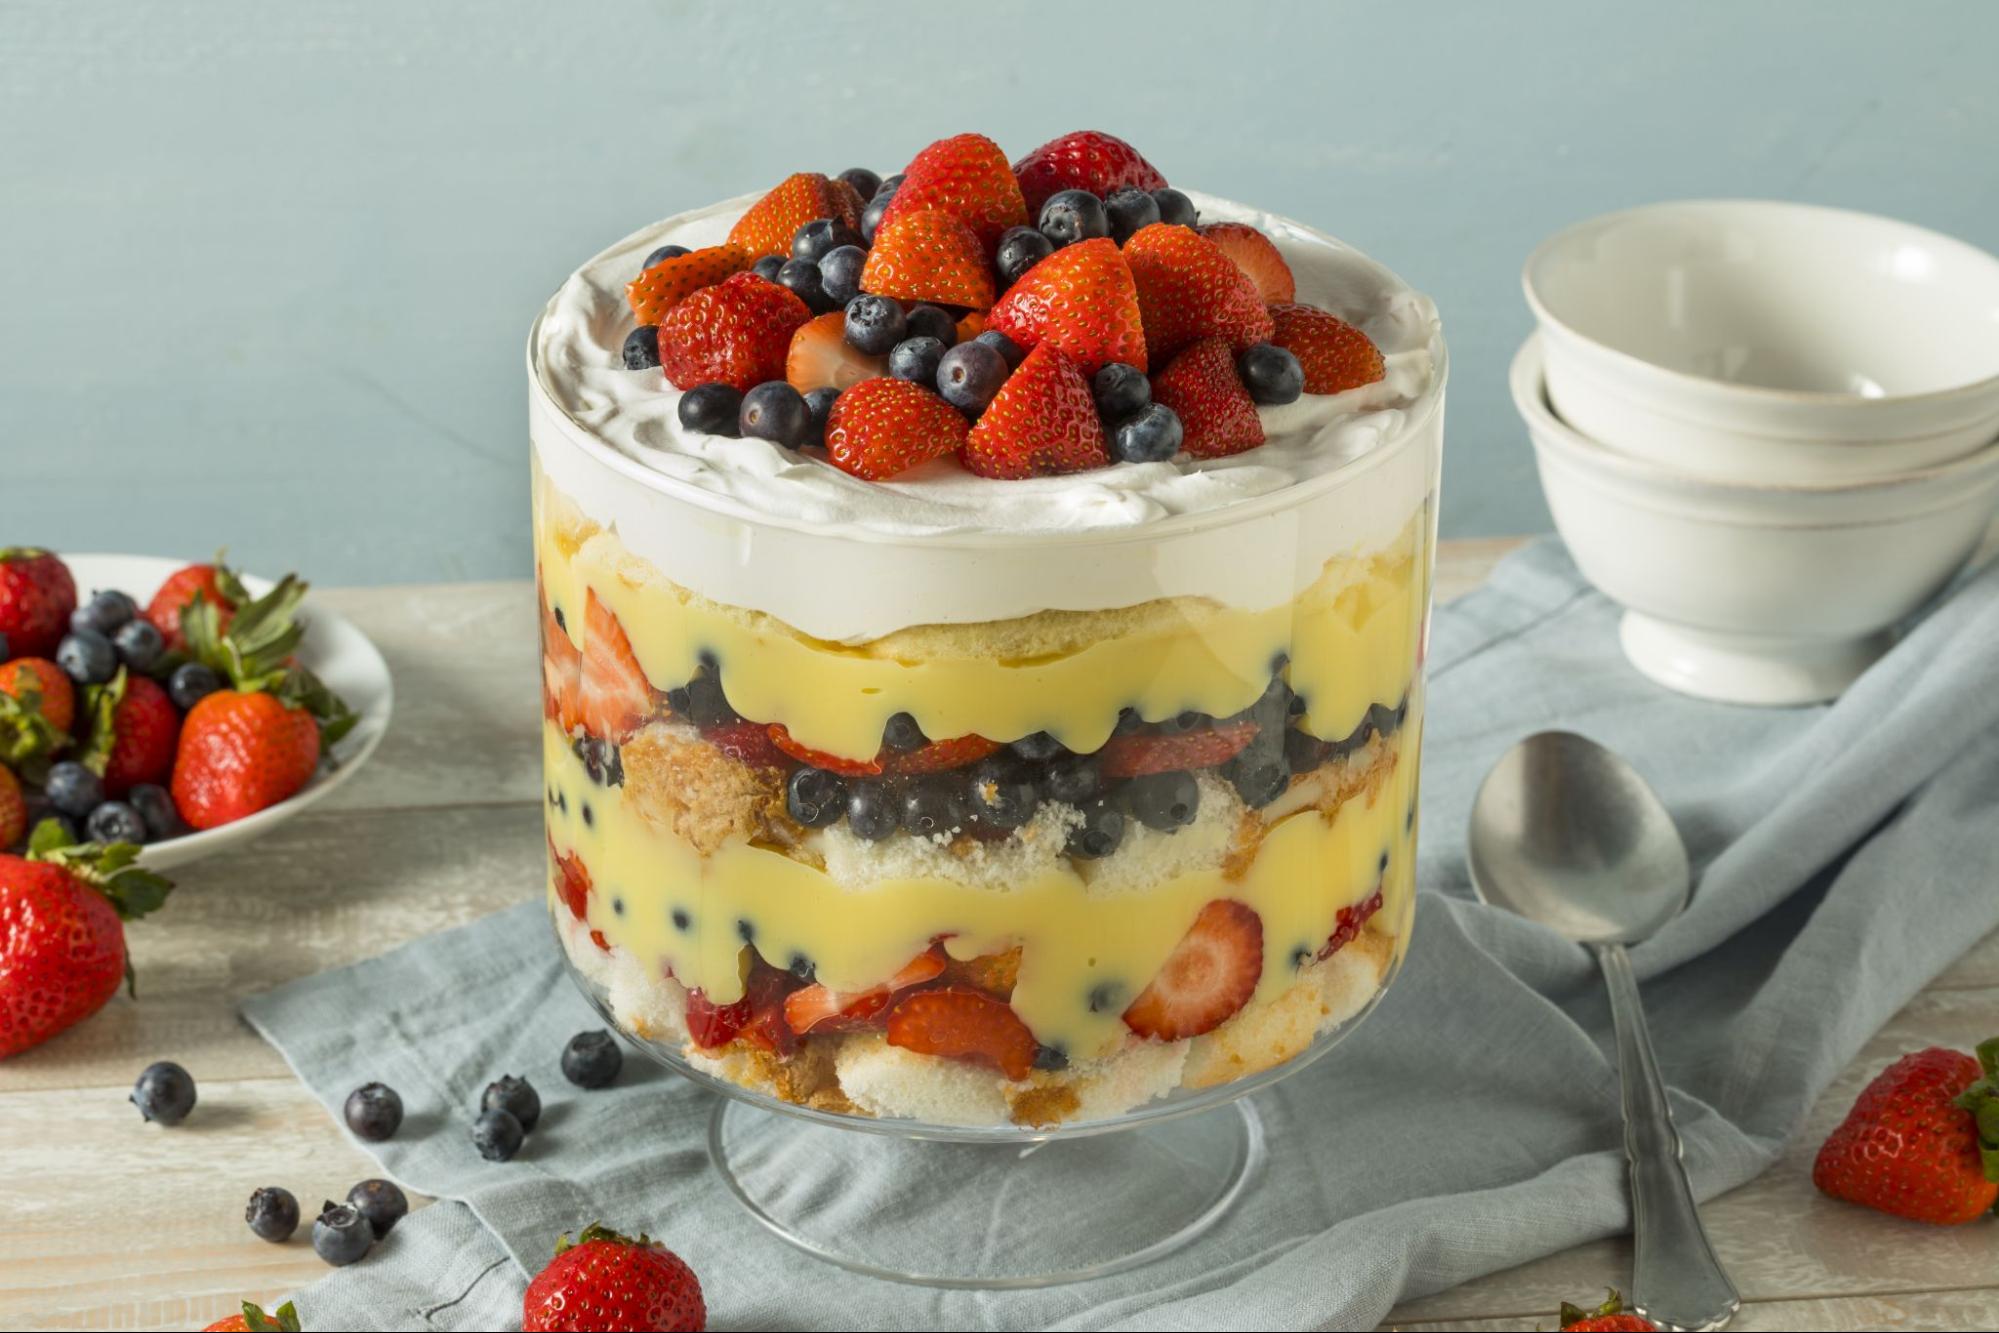 A delicious berries and cream trifle makes a great dessert.